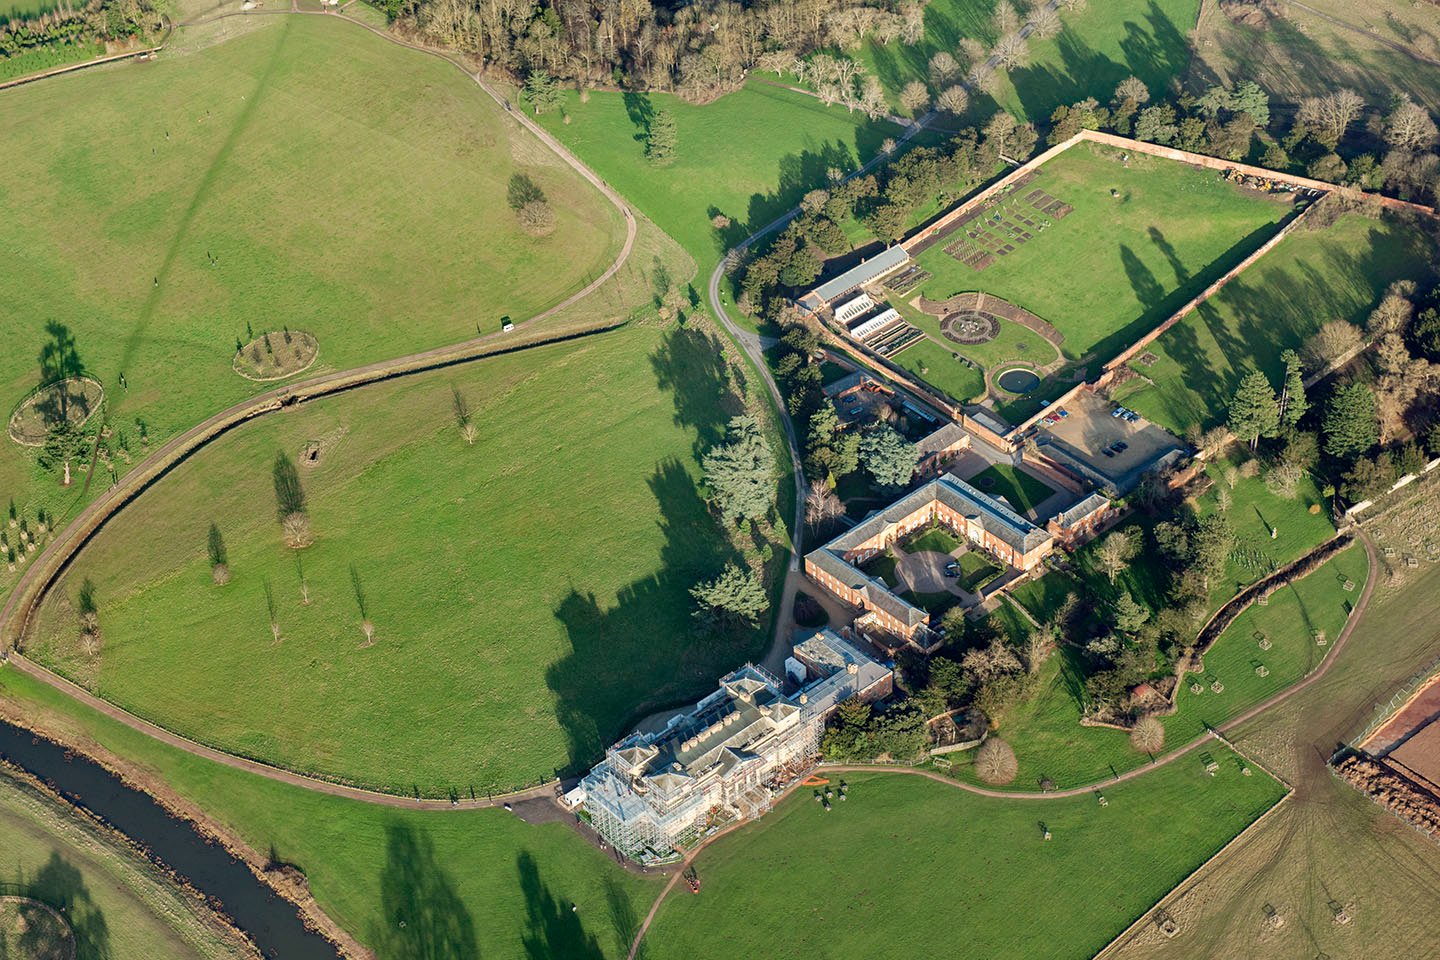 Aerial view of Croome Court, Worcestershire, with recently redug ha-ha